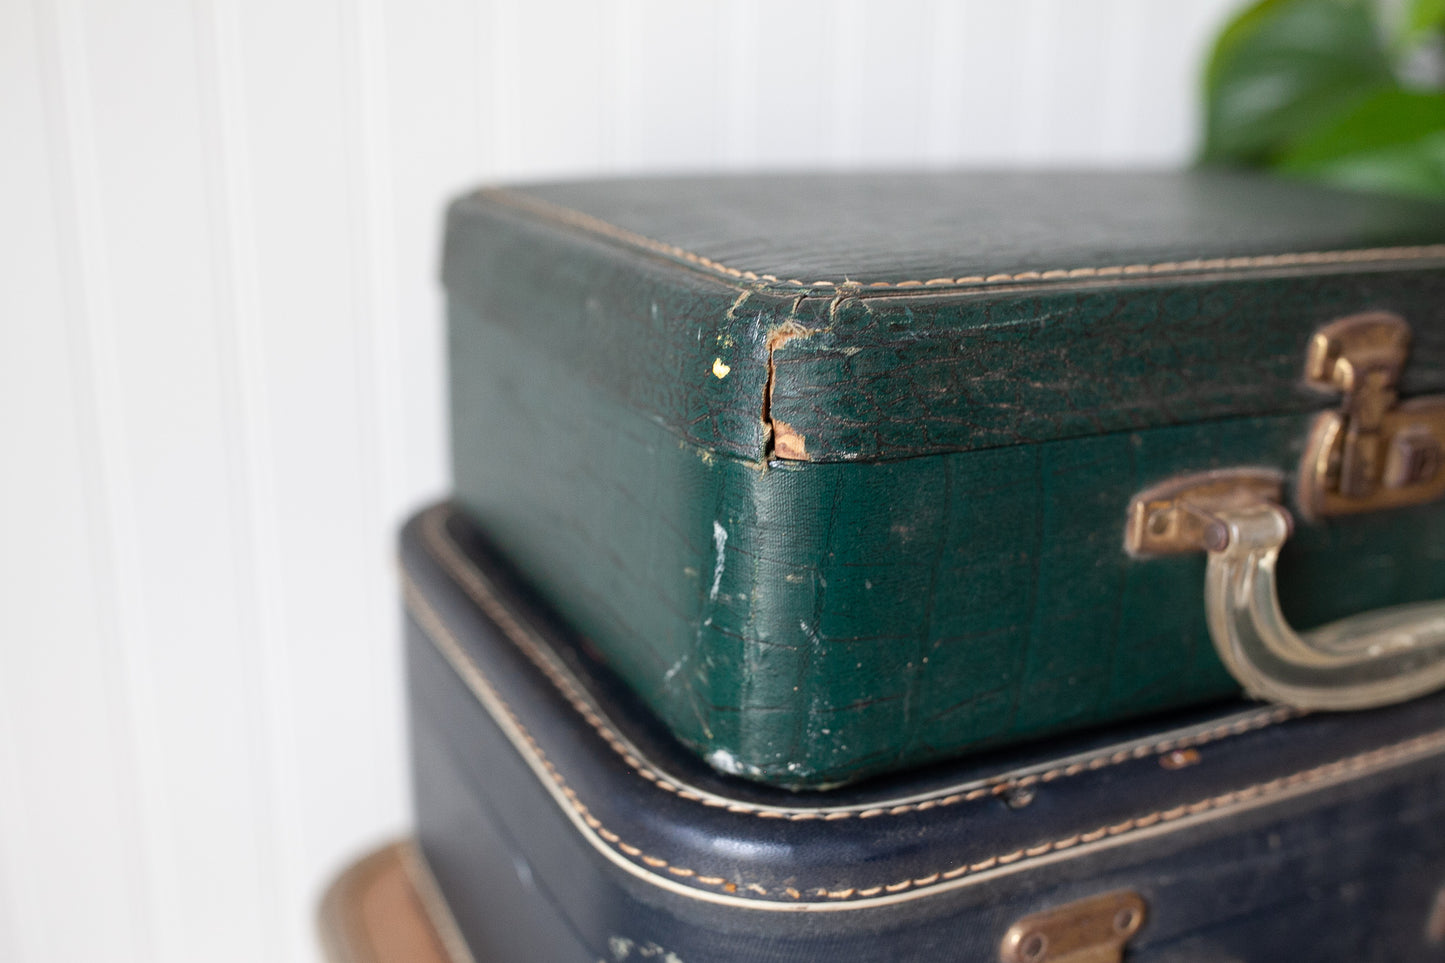 Vintage Luggage- Green Suitcase - Vintage Carry on